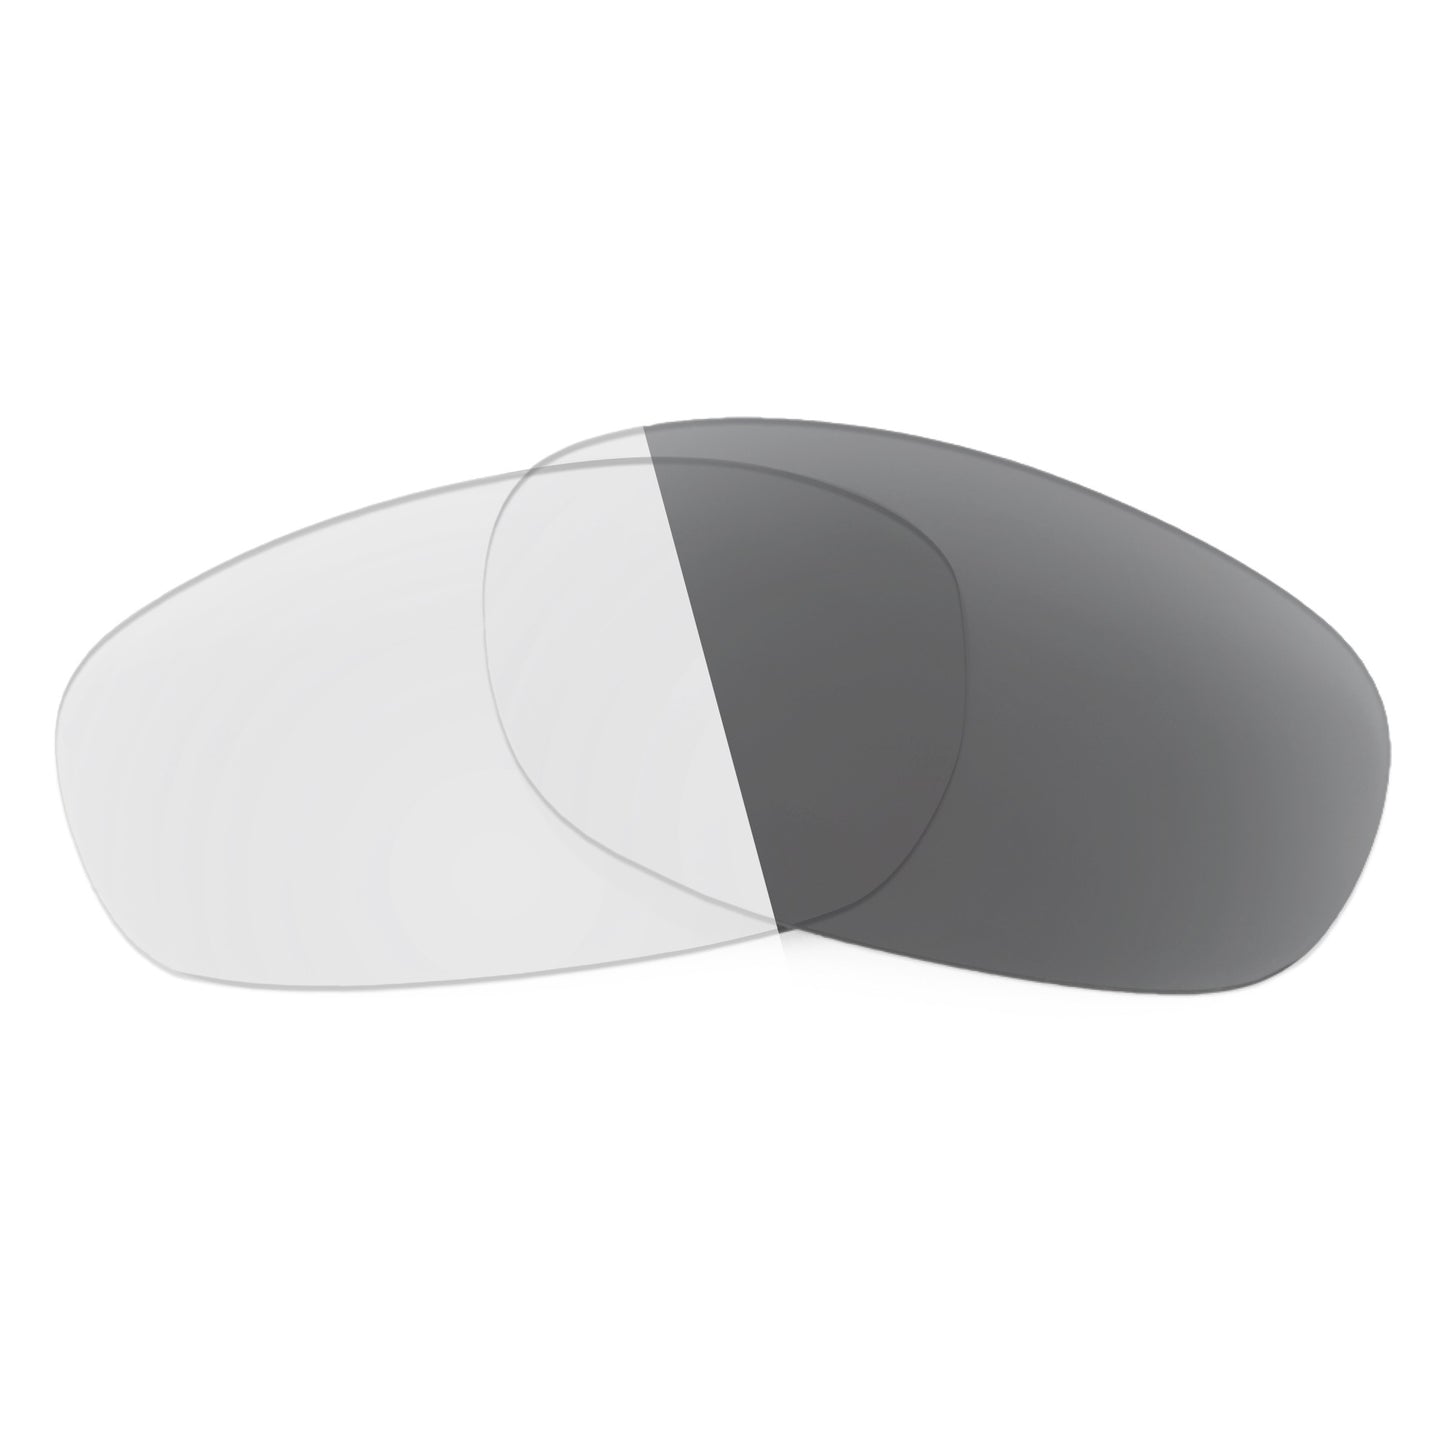 Revant replacement lenses for Ray-Ban RB3273 57mm Non-Polarized Adapt Gray Photochromic